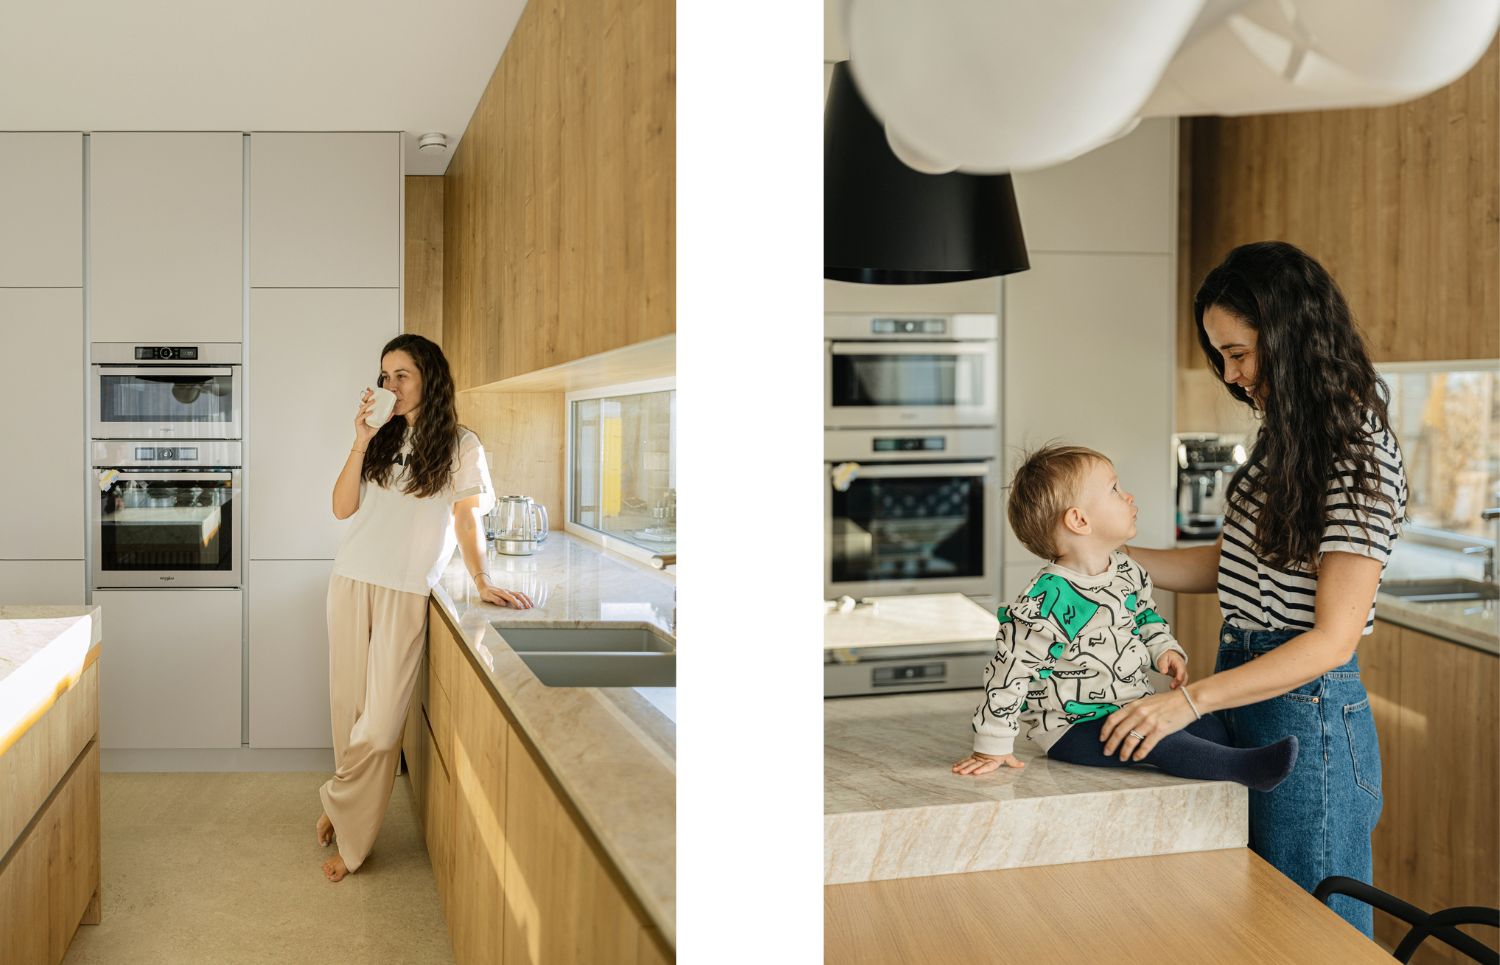 Silvia’s sense of organisation is ever present in her home, but also the happy childhood of her two sons Tomi and Alex.